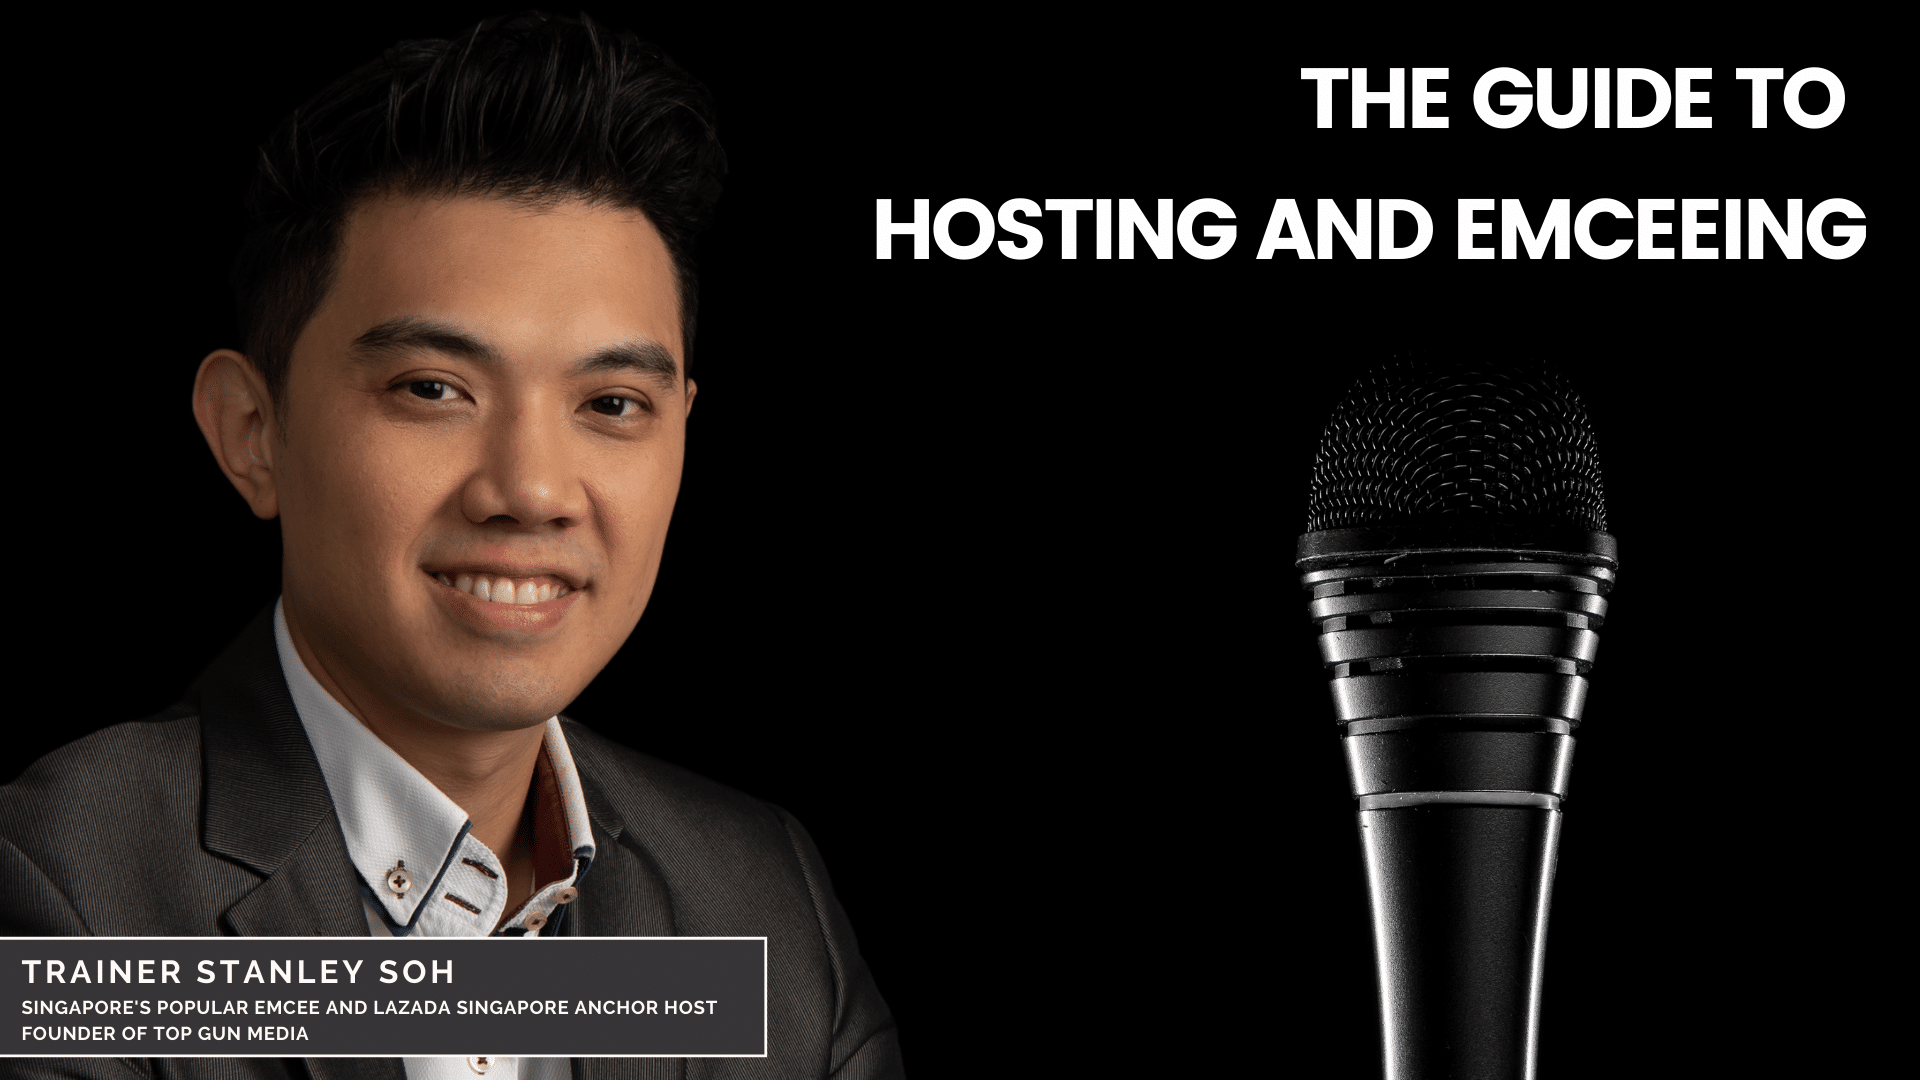 The Guide to Hosting & Emceeing